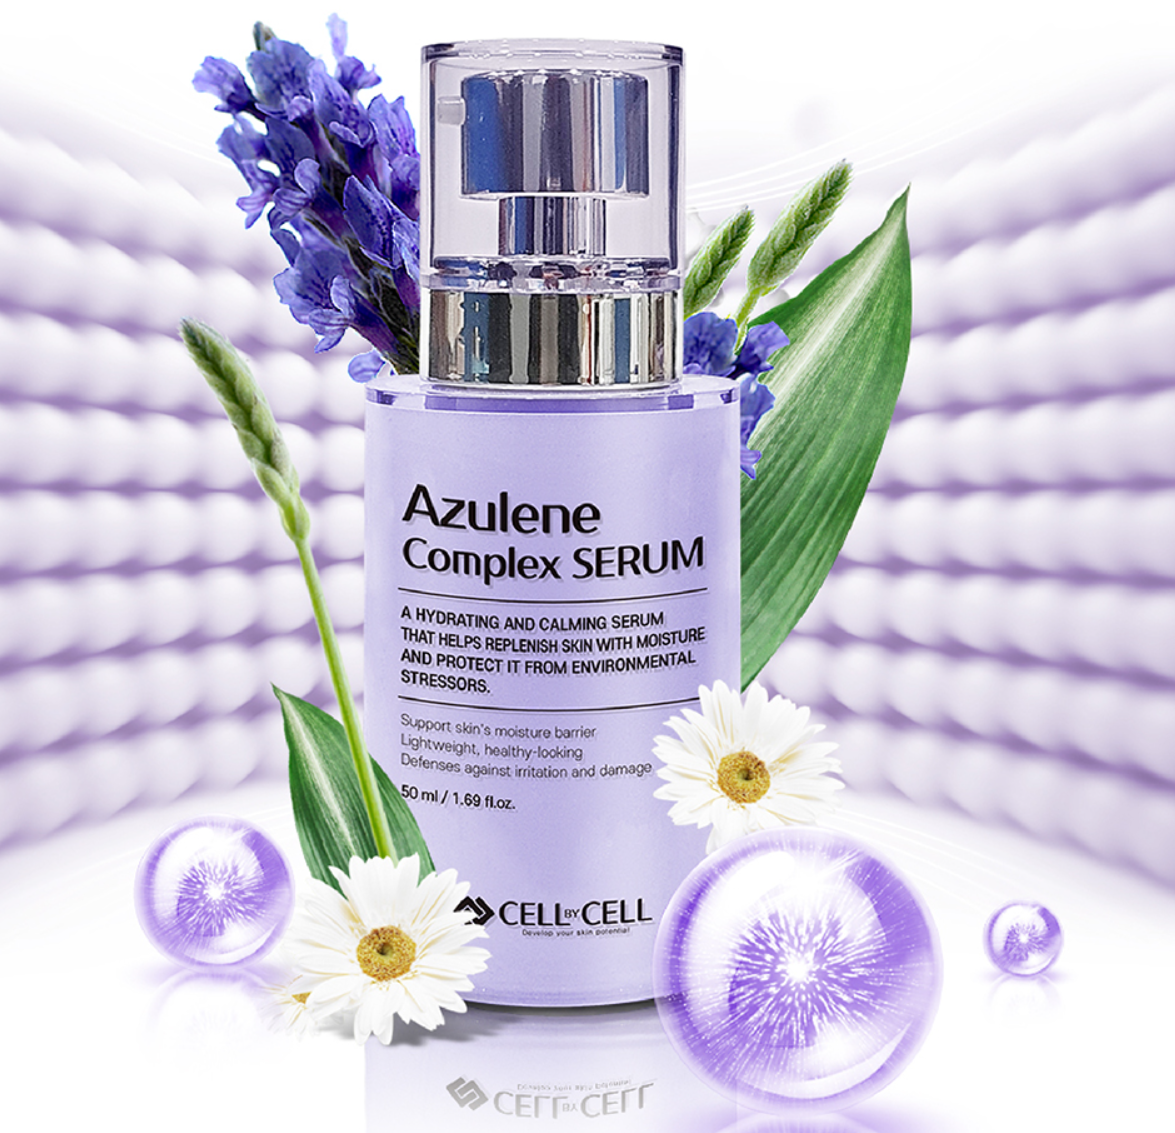 CELL by CELL Azulene Complex Serum